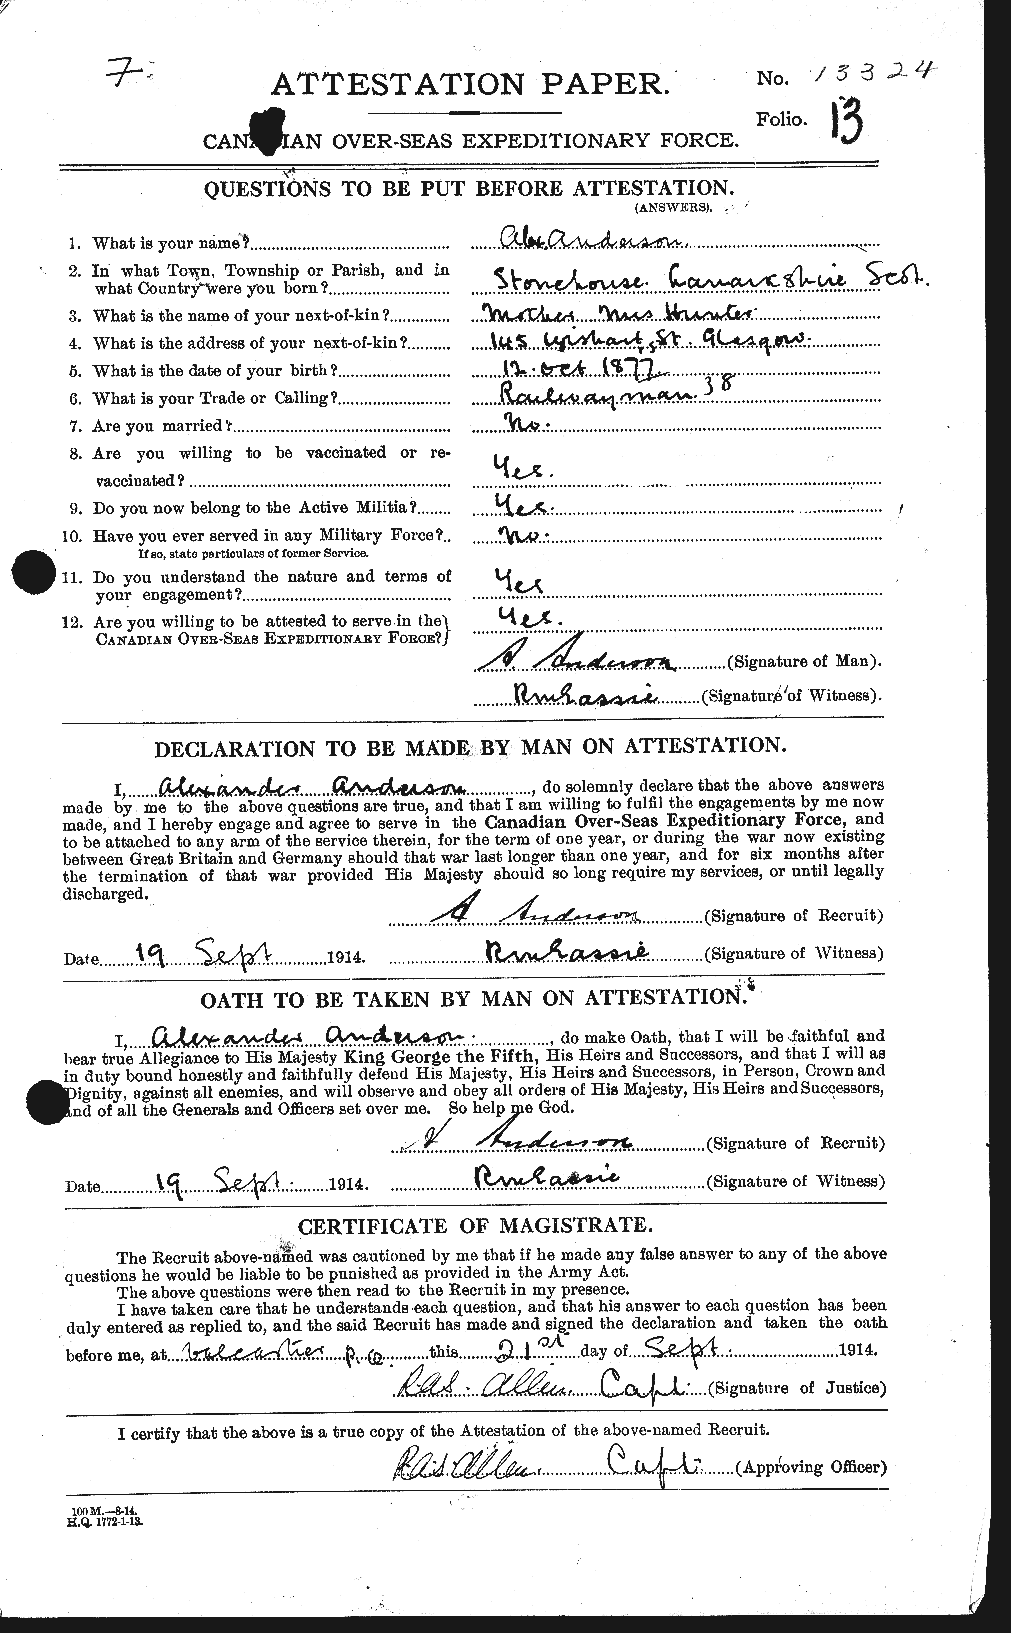 Personnel Records of the First World War - CEF 209513a